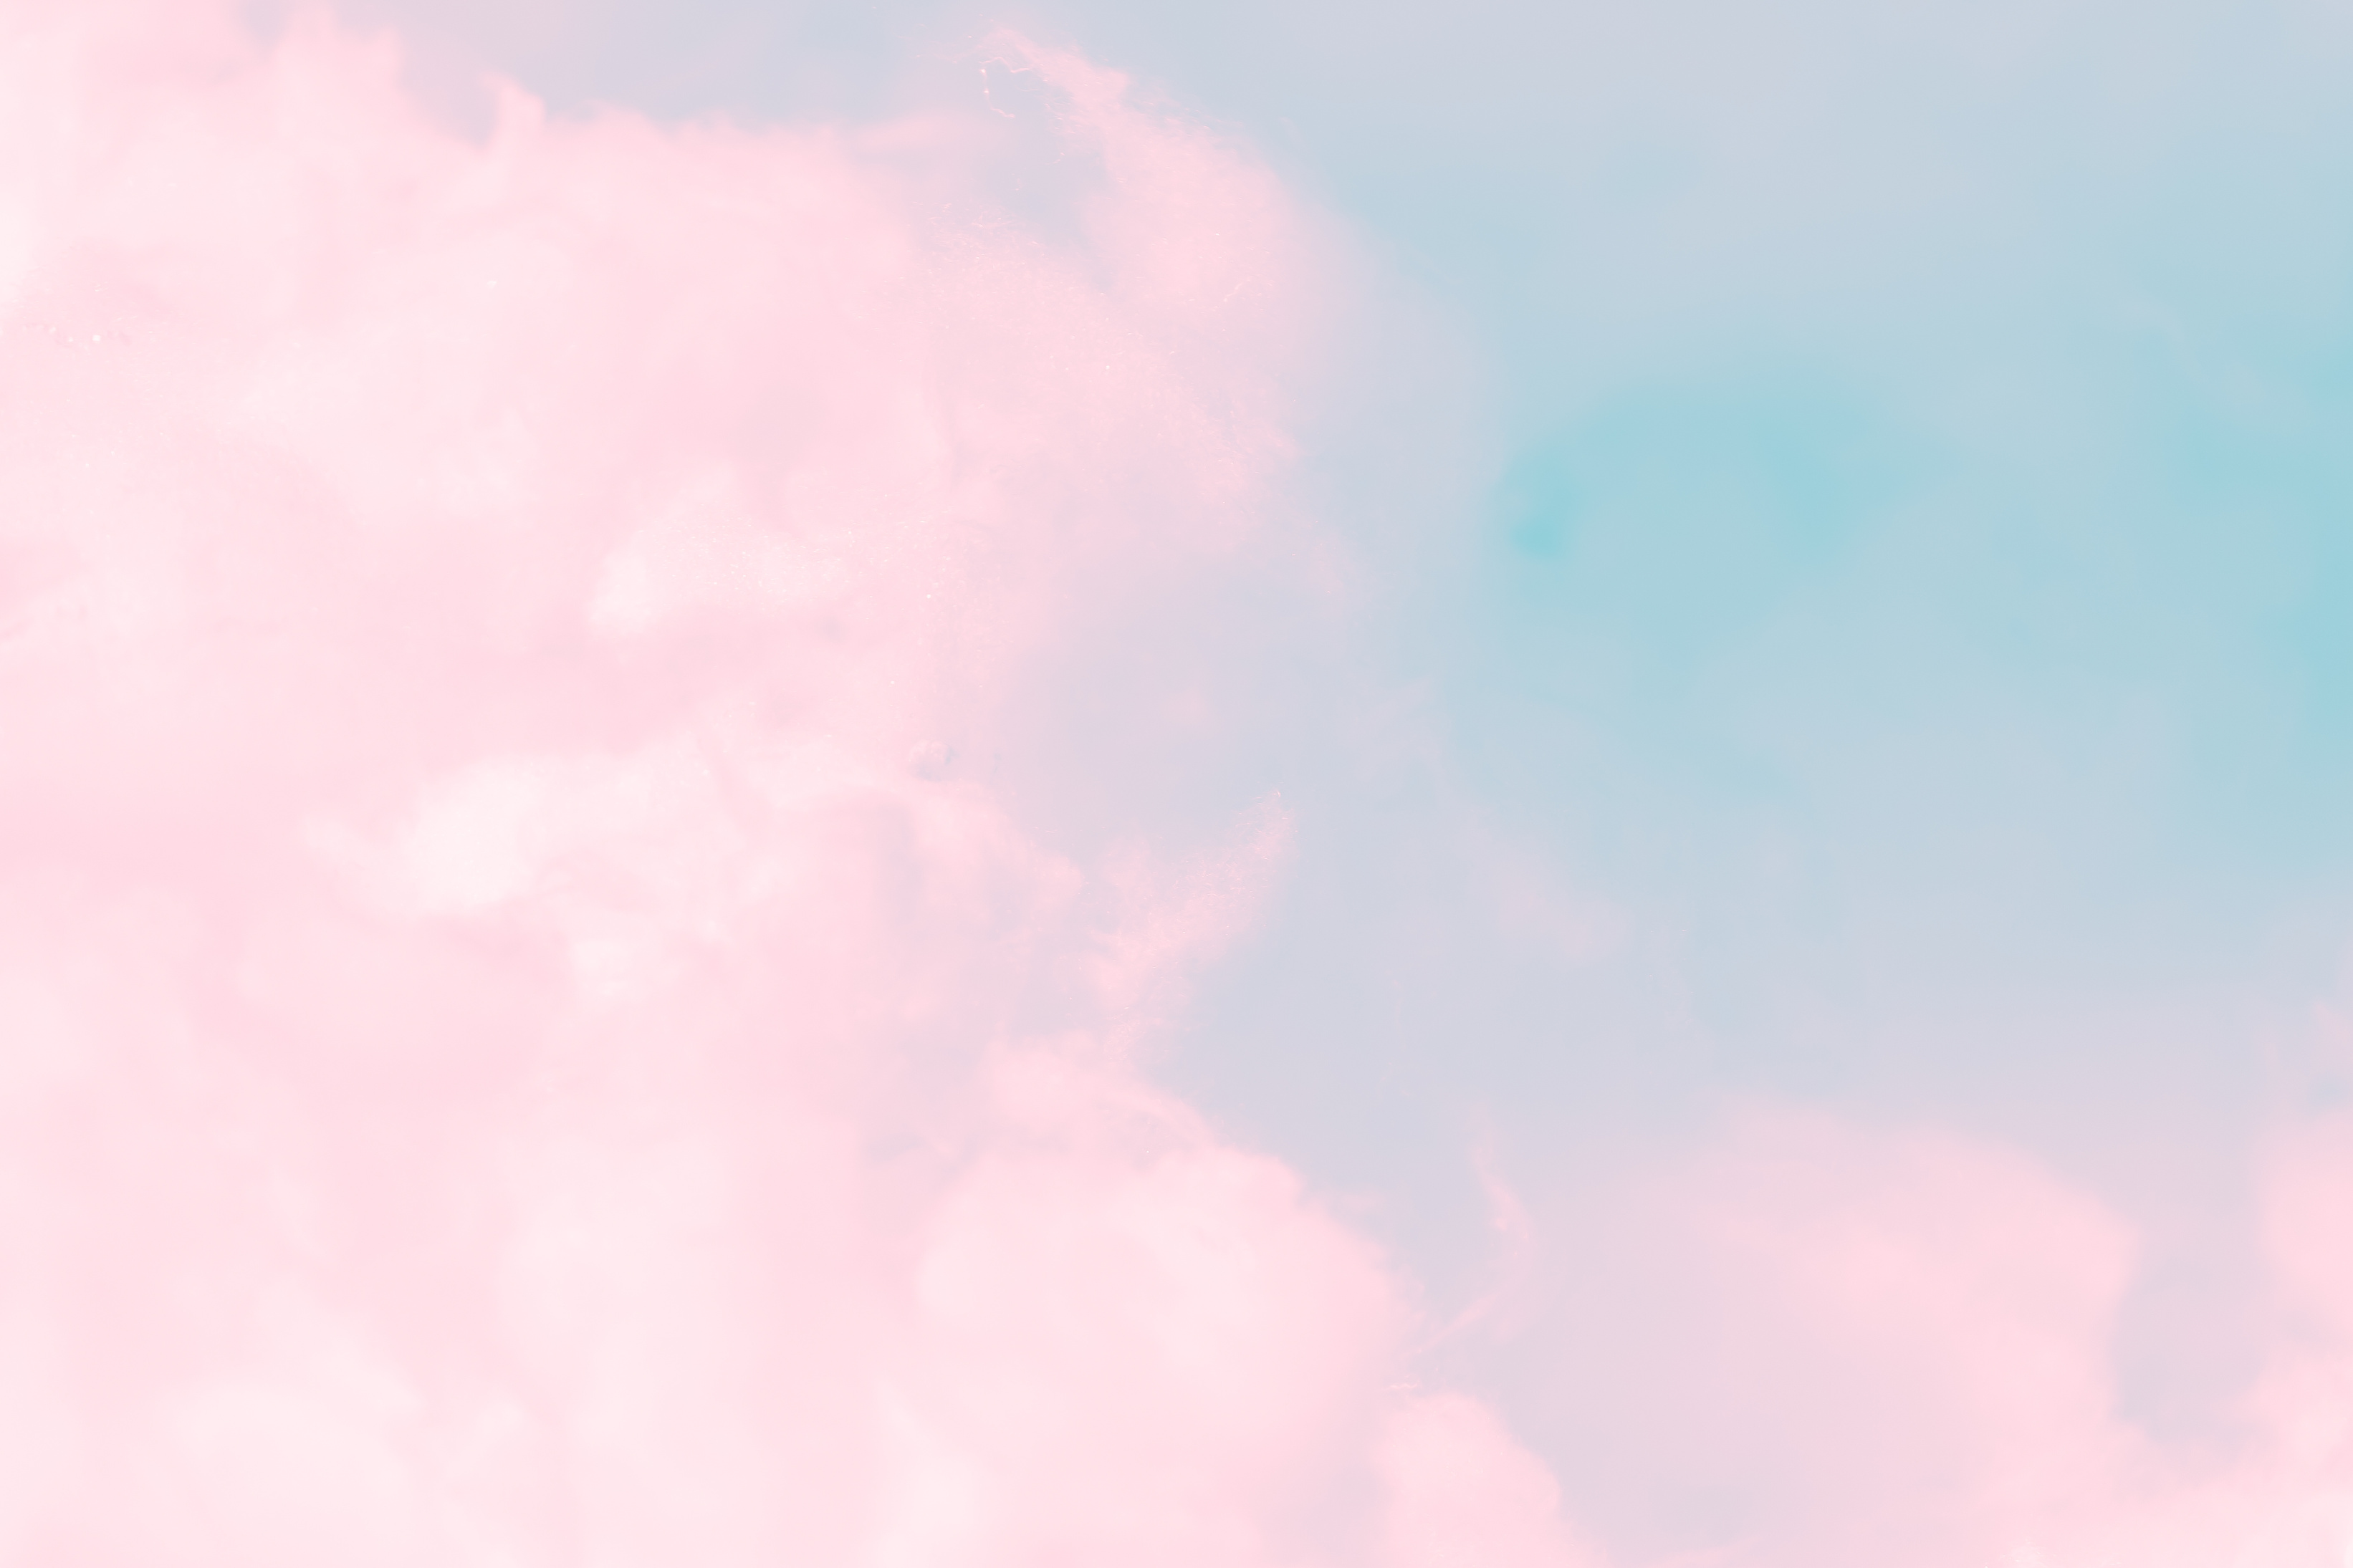 Cloud series : Colorful cotton candy. Soft fog and clouds with a pastel colored pink to skyblue gradient for background.